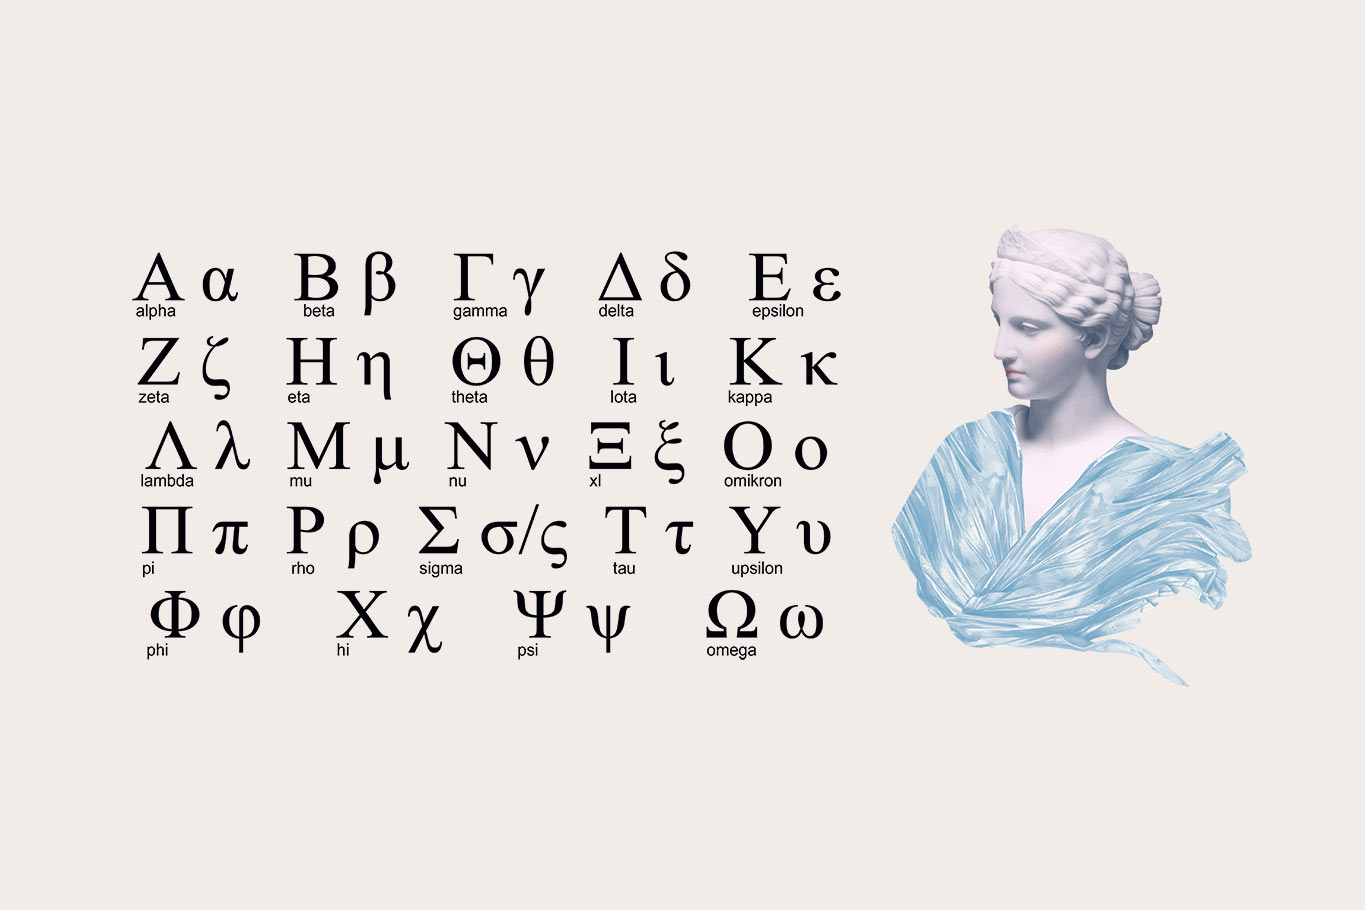 Miniature Arctic Lære Greeks Symbols in Code, Science and History (Cool Facts included!) -  αlphαrithms